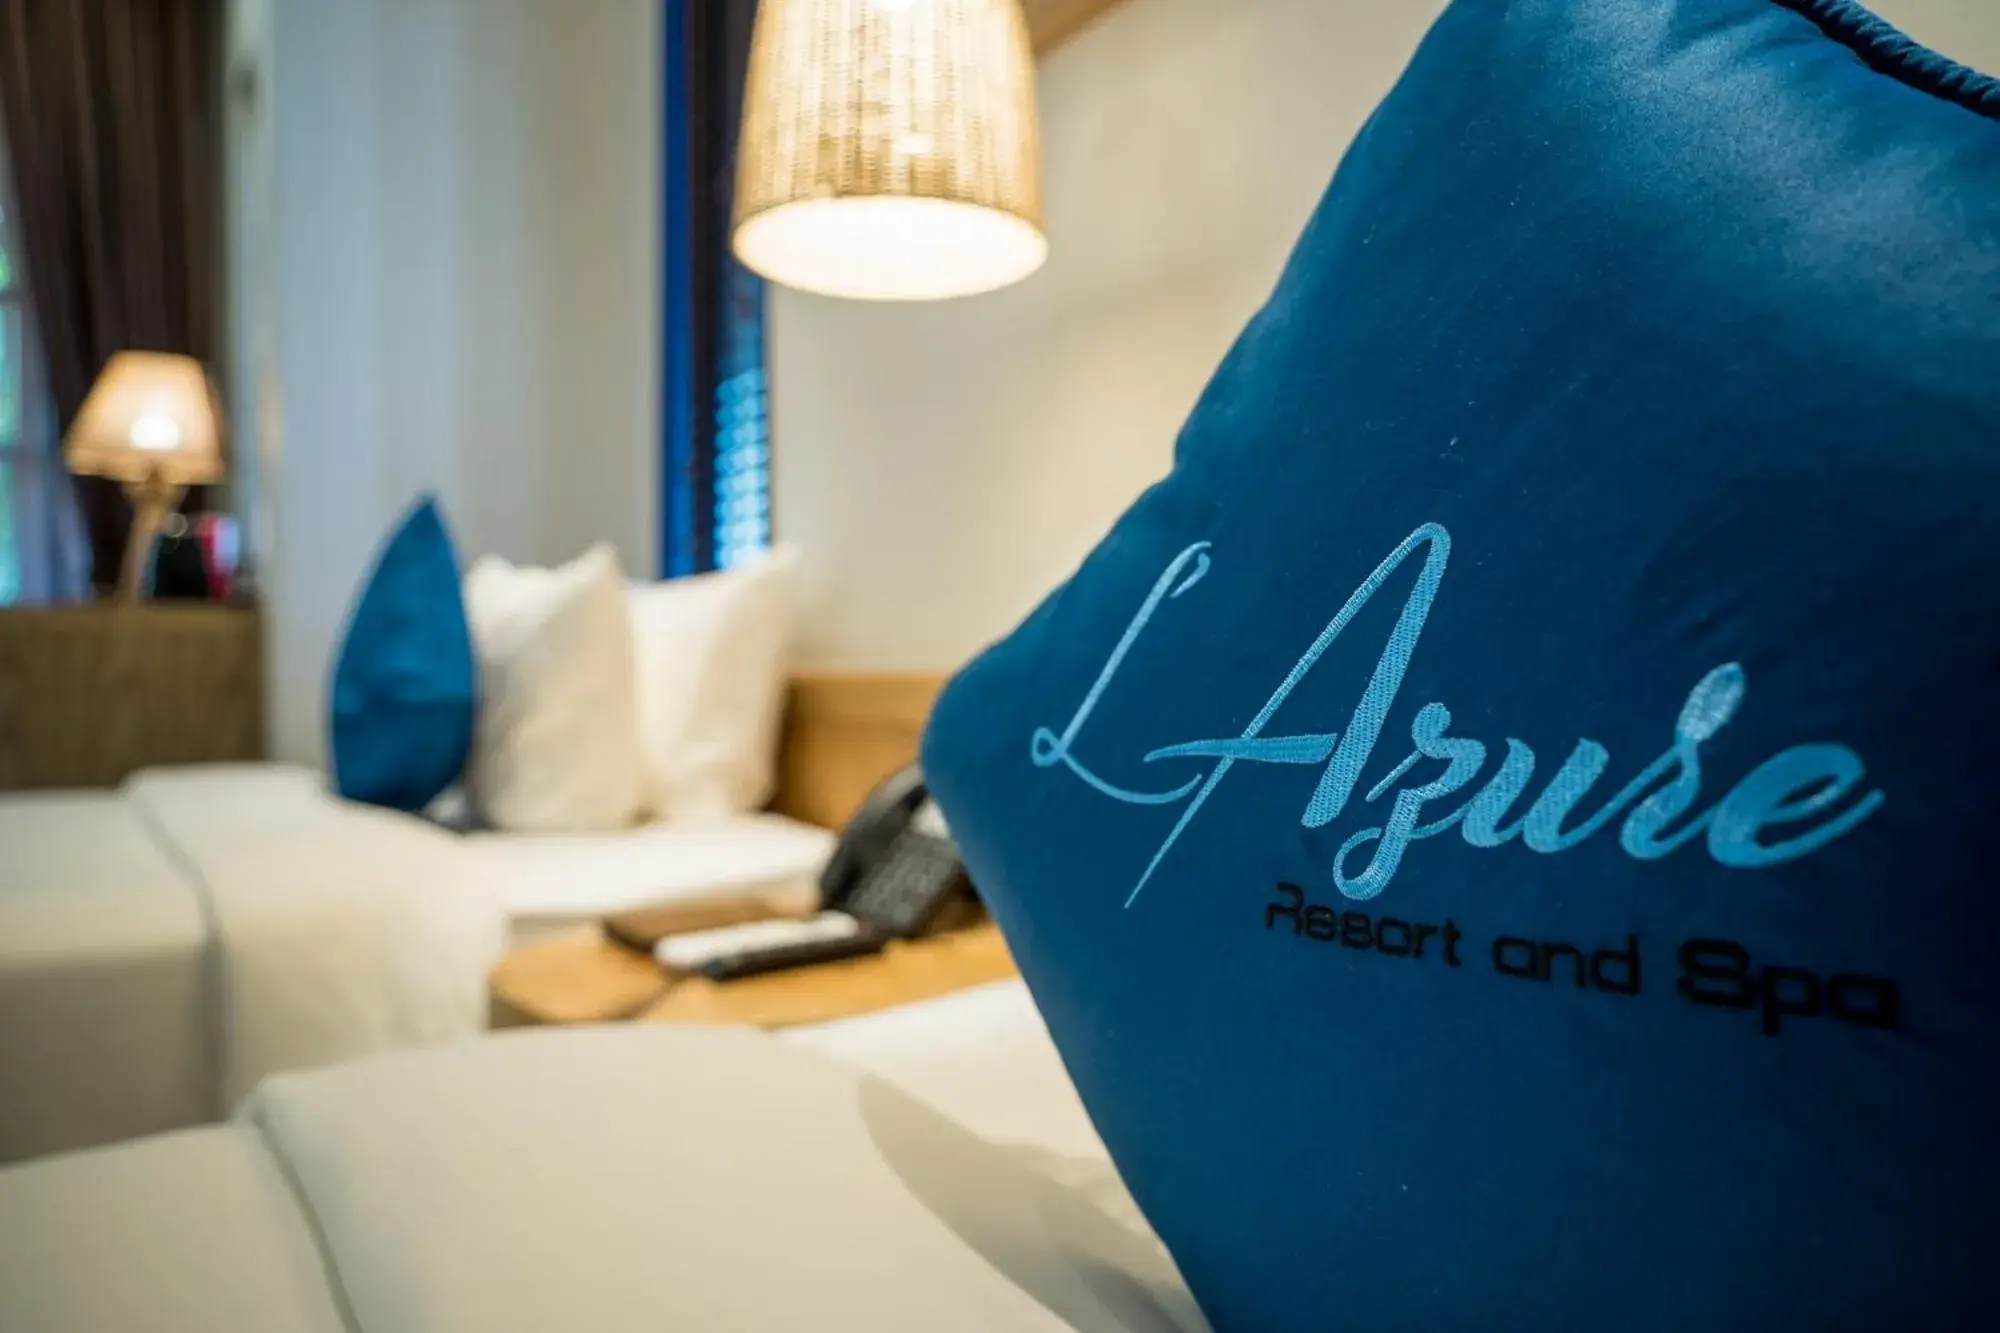 Property logo or sign in L'Azure Resort and Spa